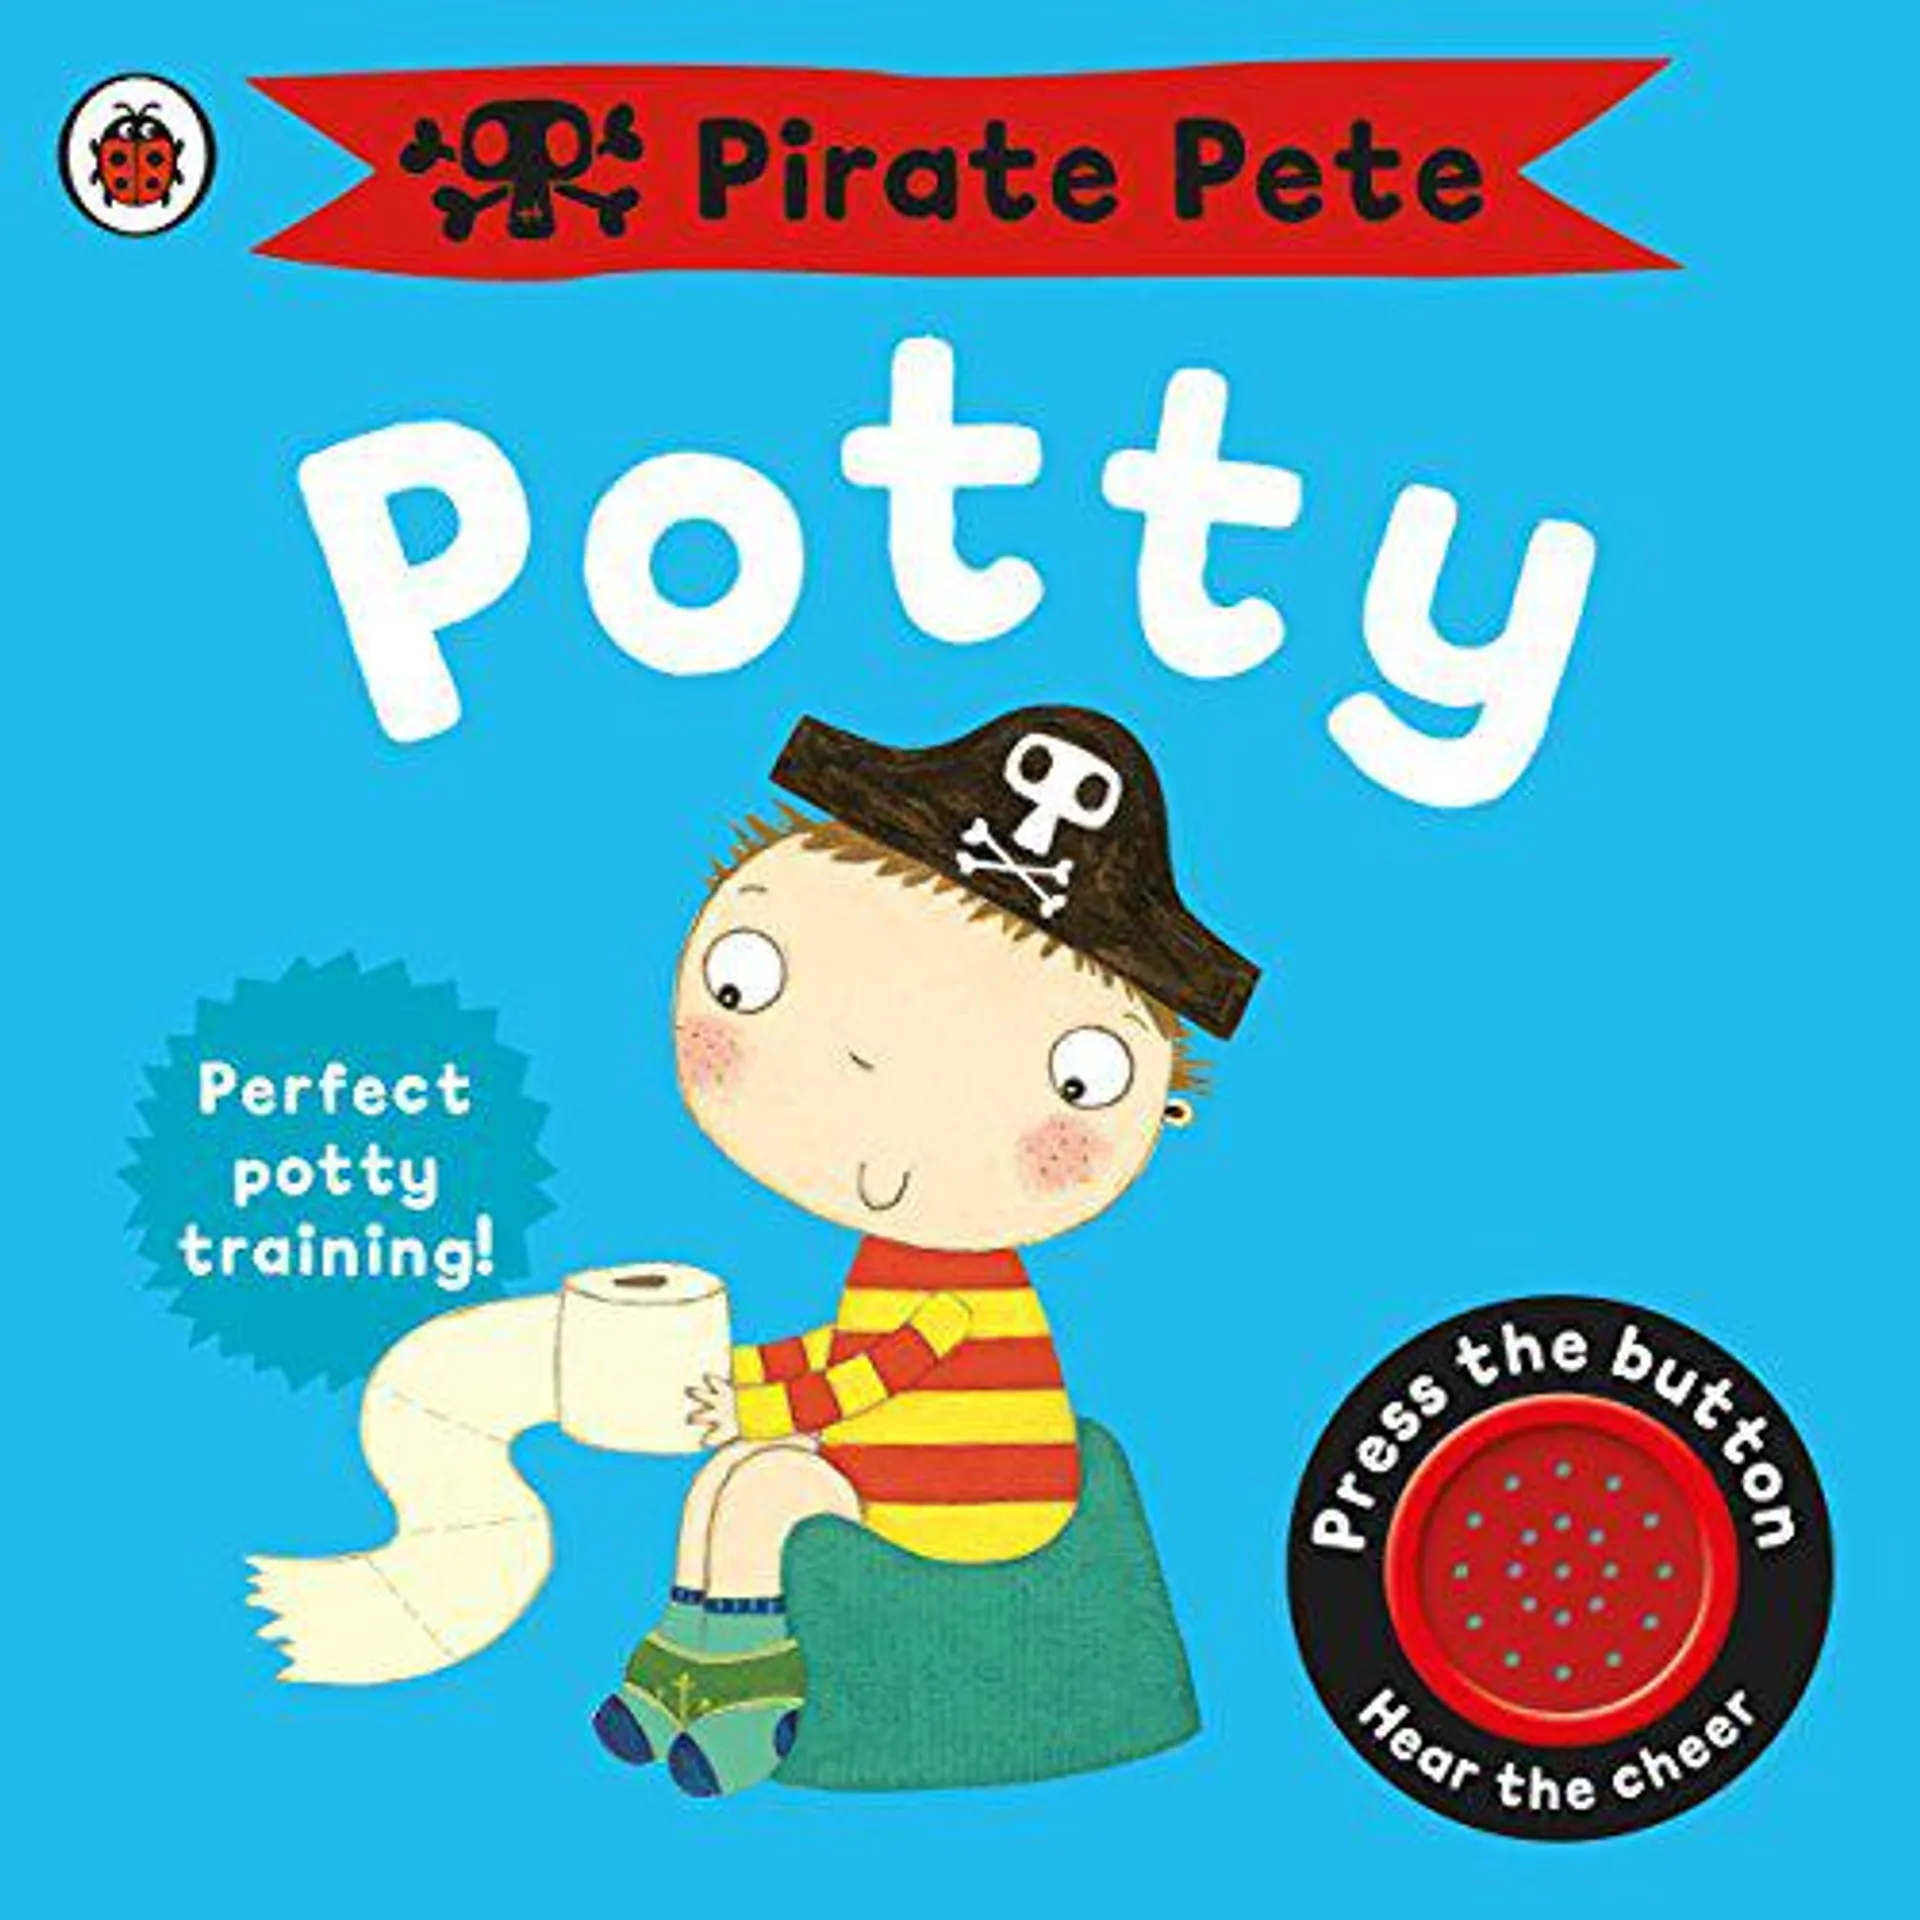 Pirate Pete's Potty by Andrea Pinnington